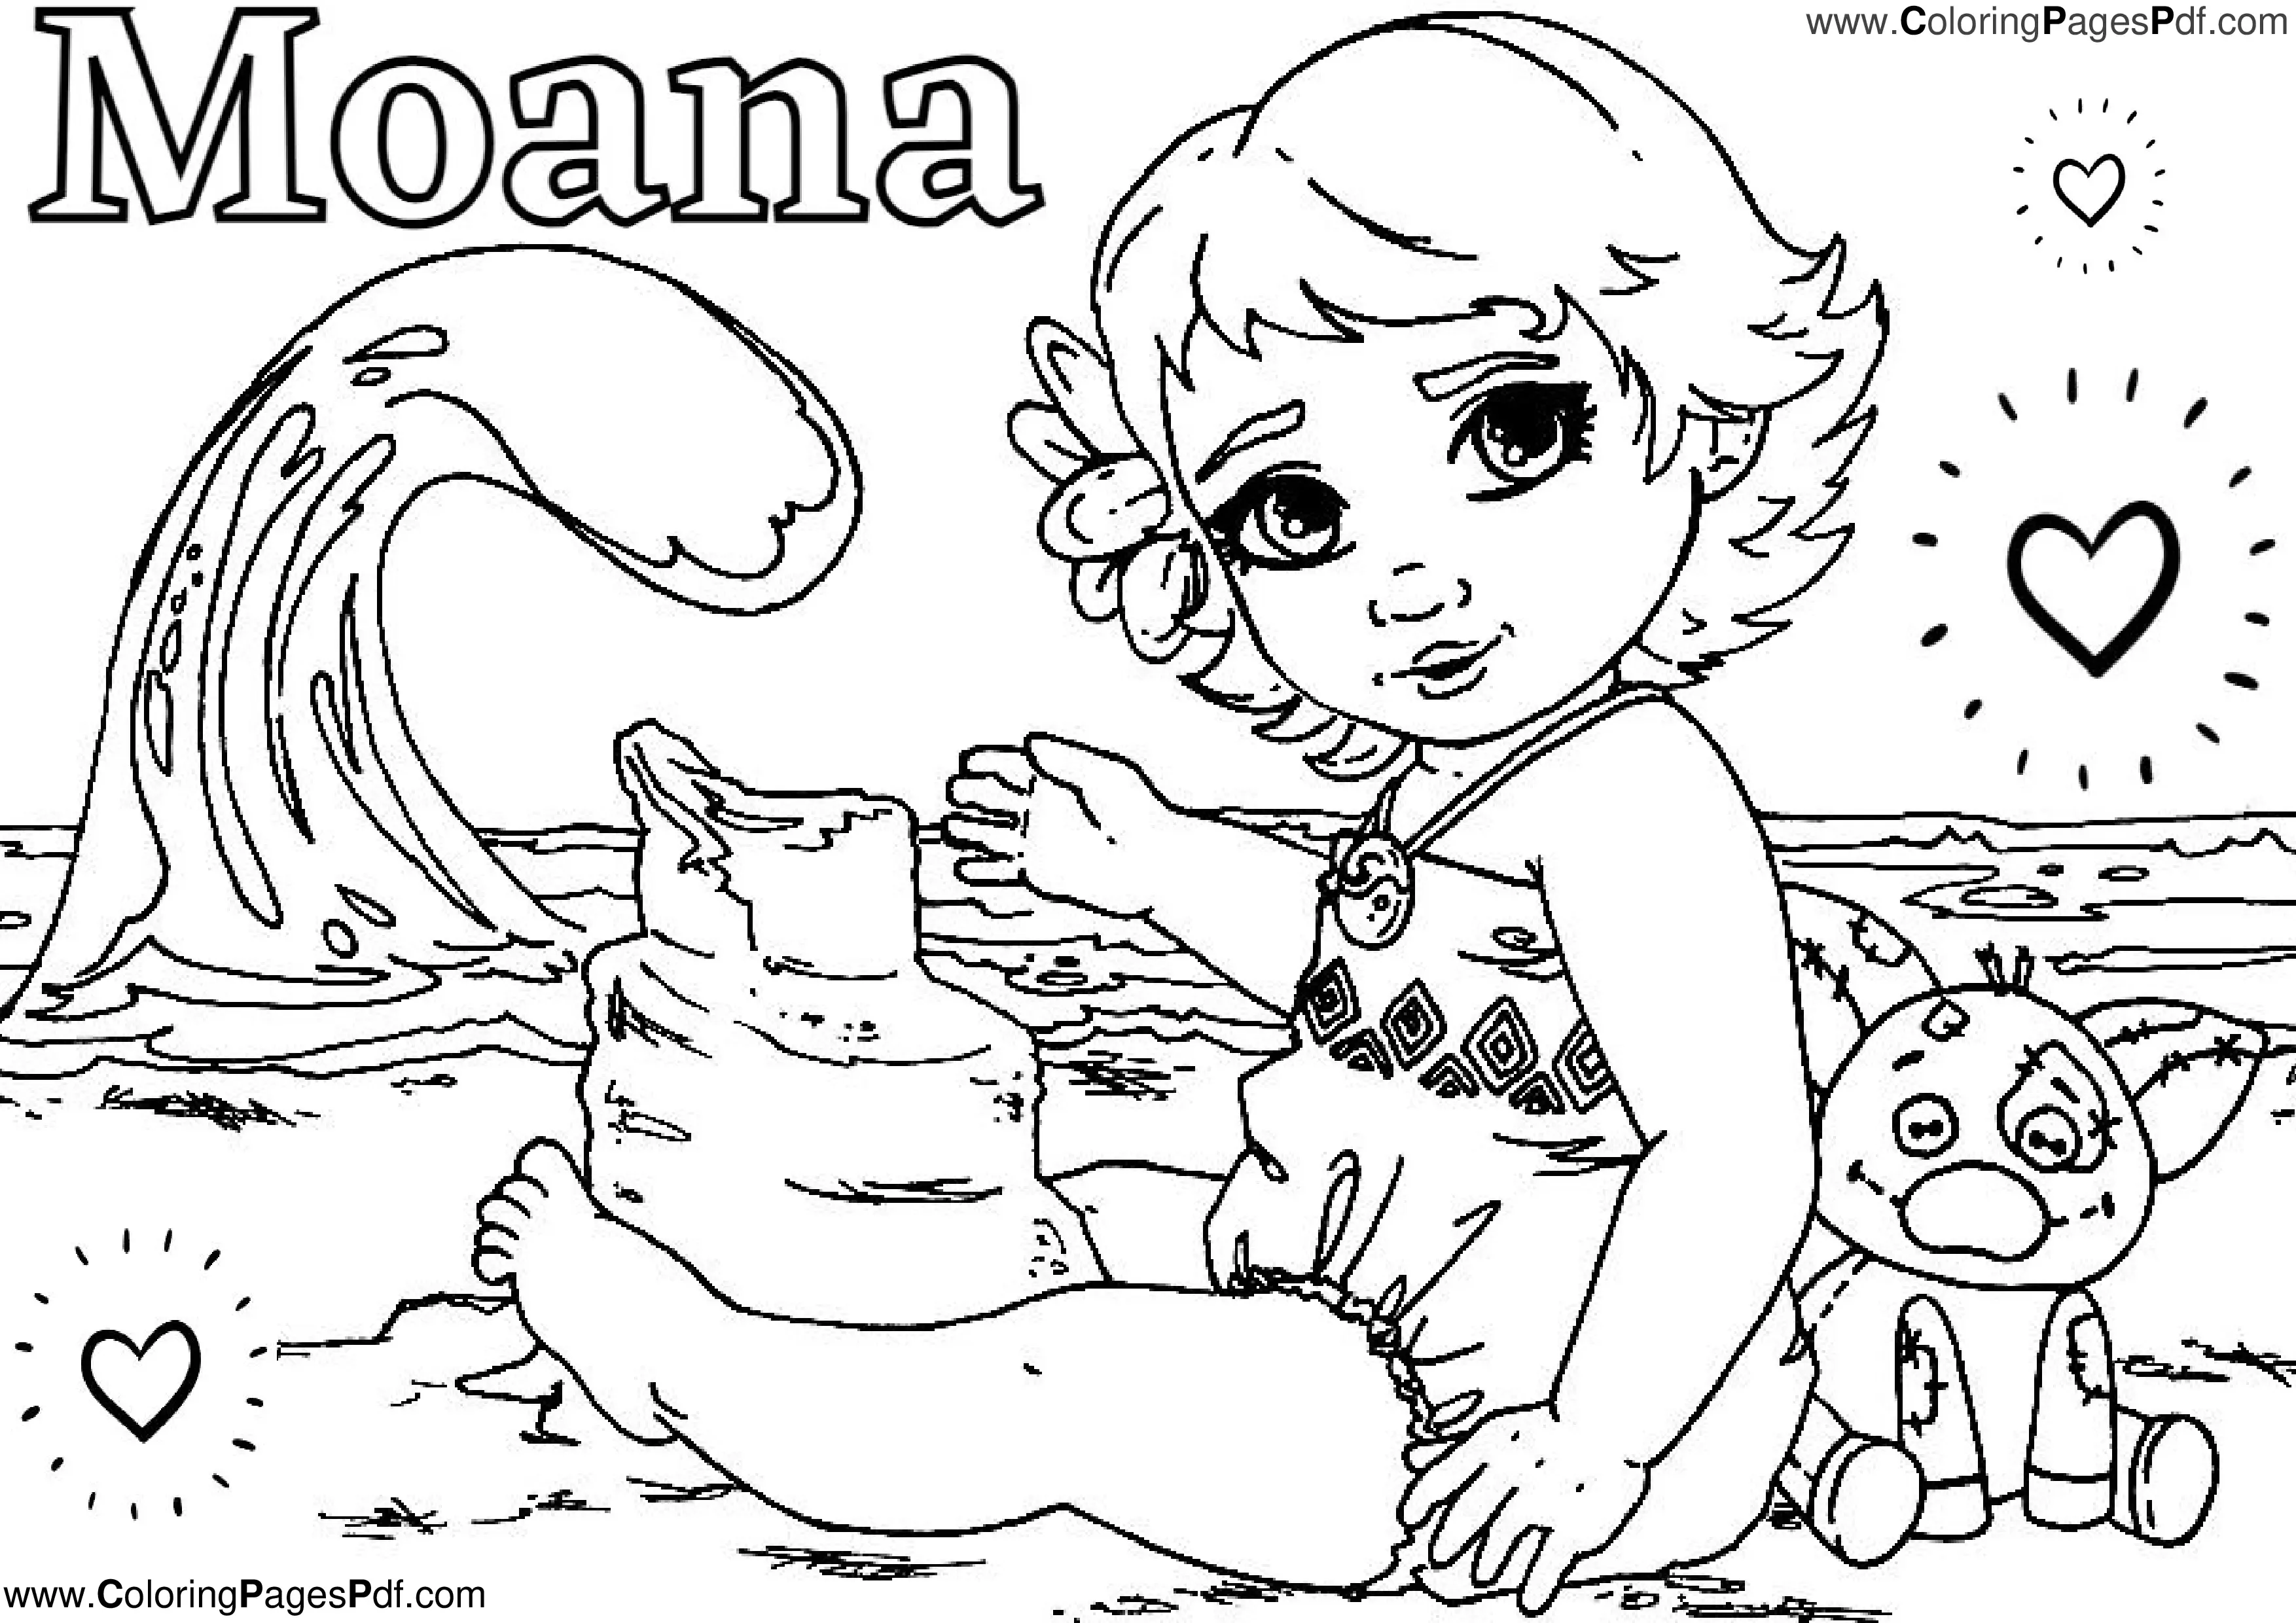 Moana mermaid coloring pages